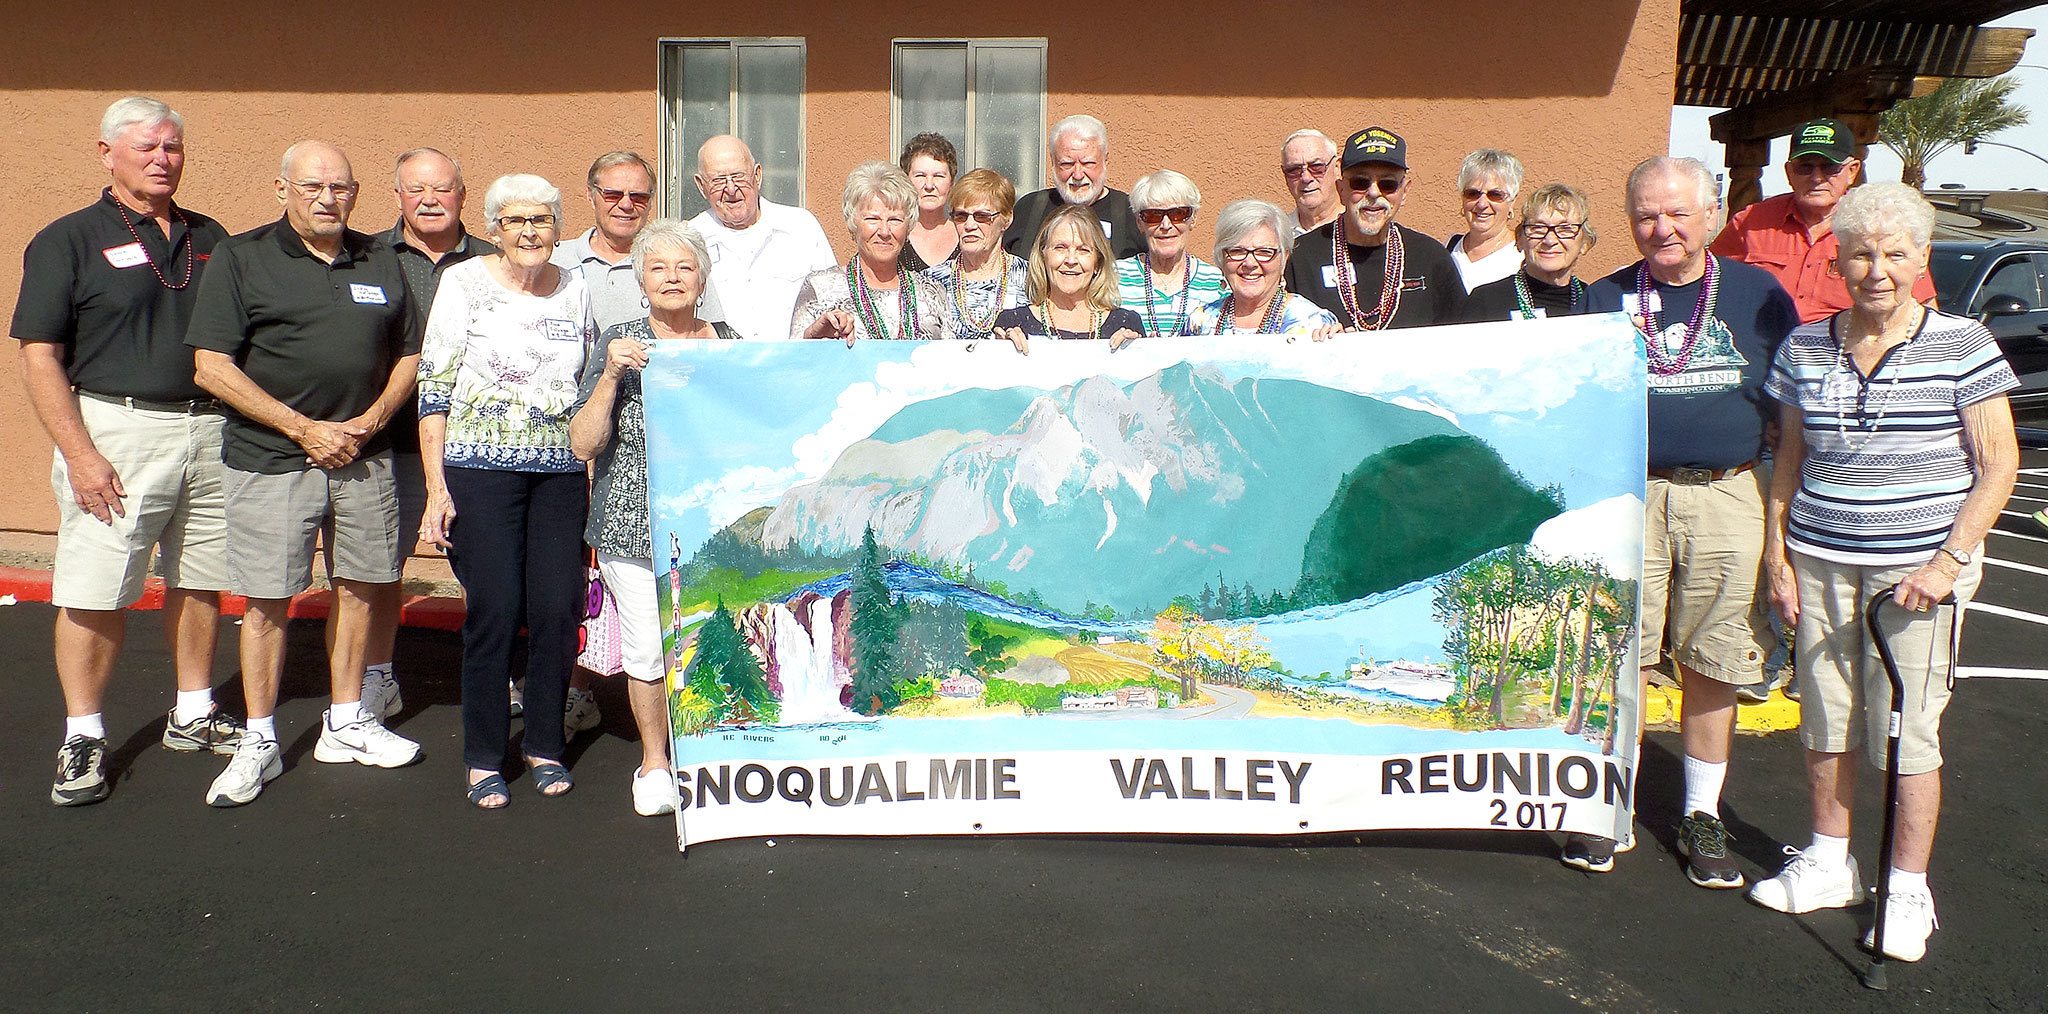 Members of the annual Snoqualmie Valley Snowbirds reunion in Yuma, Ariz., pose for a photo.